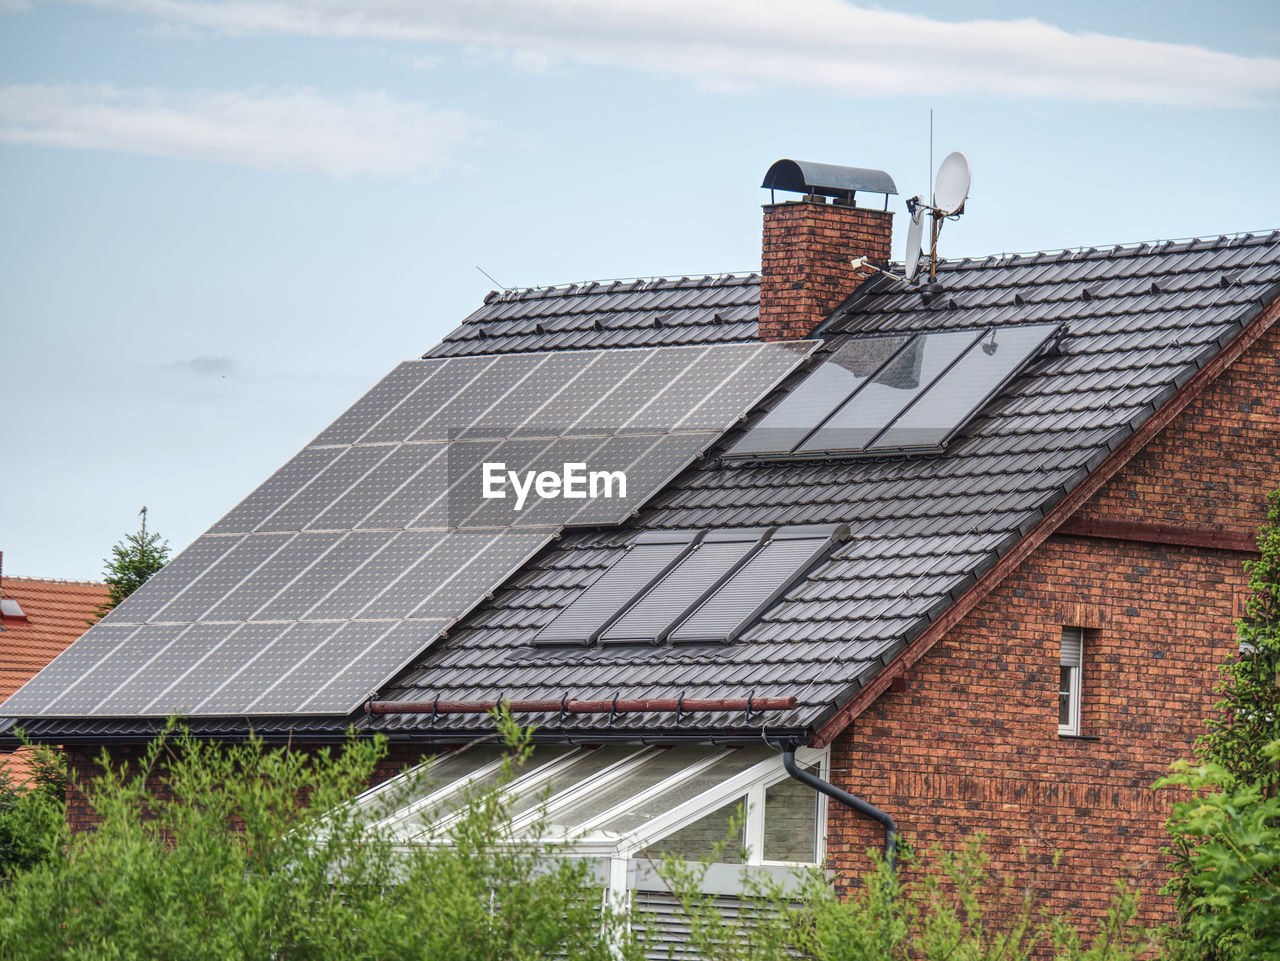 Large solar panels on roof of house. horizontal orientation, blue sky, gray panels on brown roof.